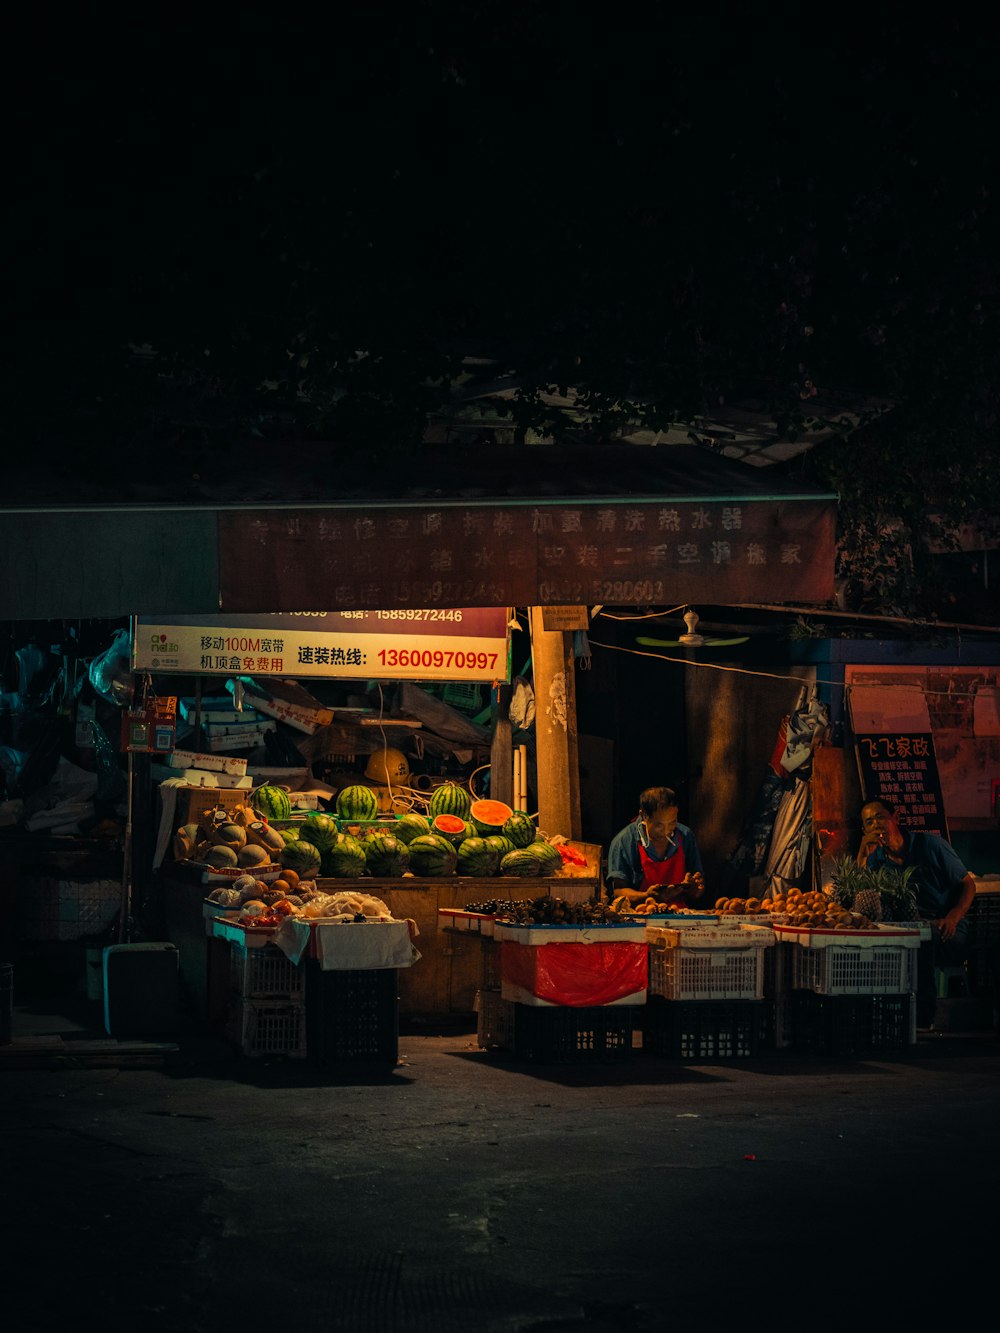 fruit stand in front of store during nighttime